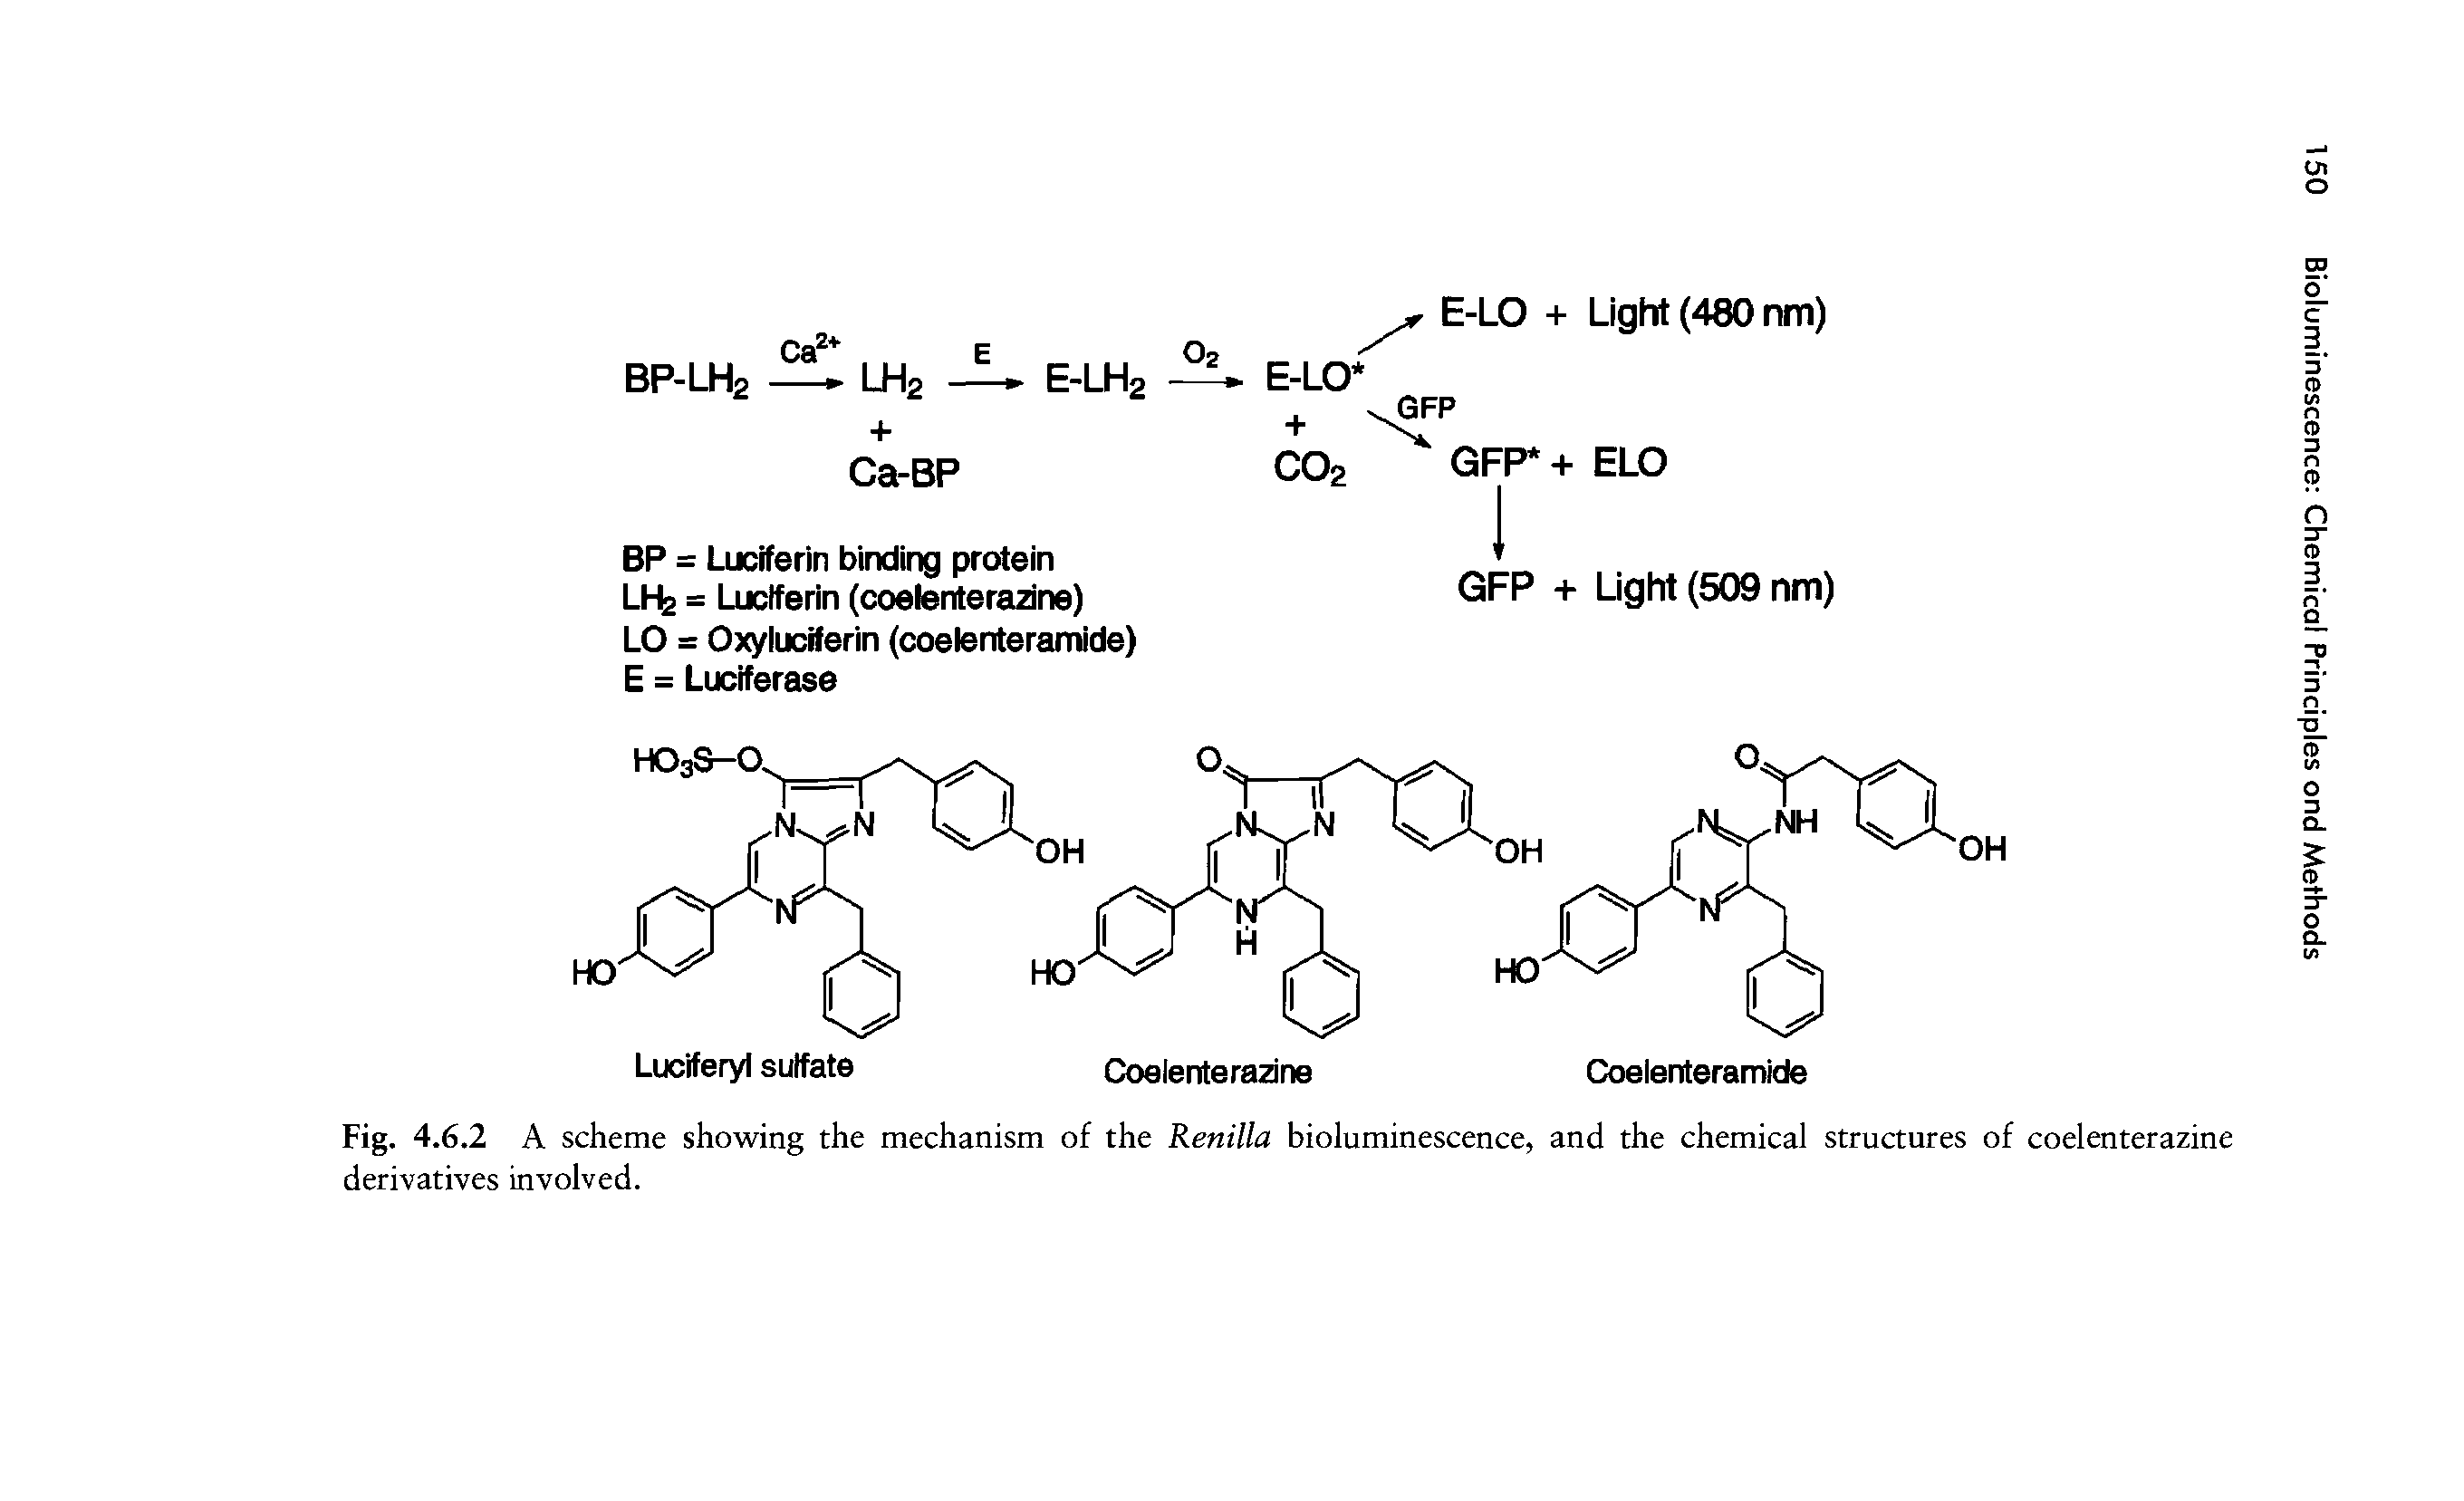 Fig. 4.6.2 A scheme showing the mechanism of the Renilla bioluminescence, and the chemical structures of coelenterazine derivatives involved.